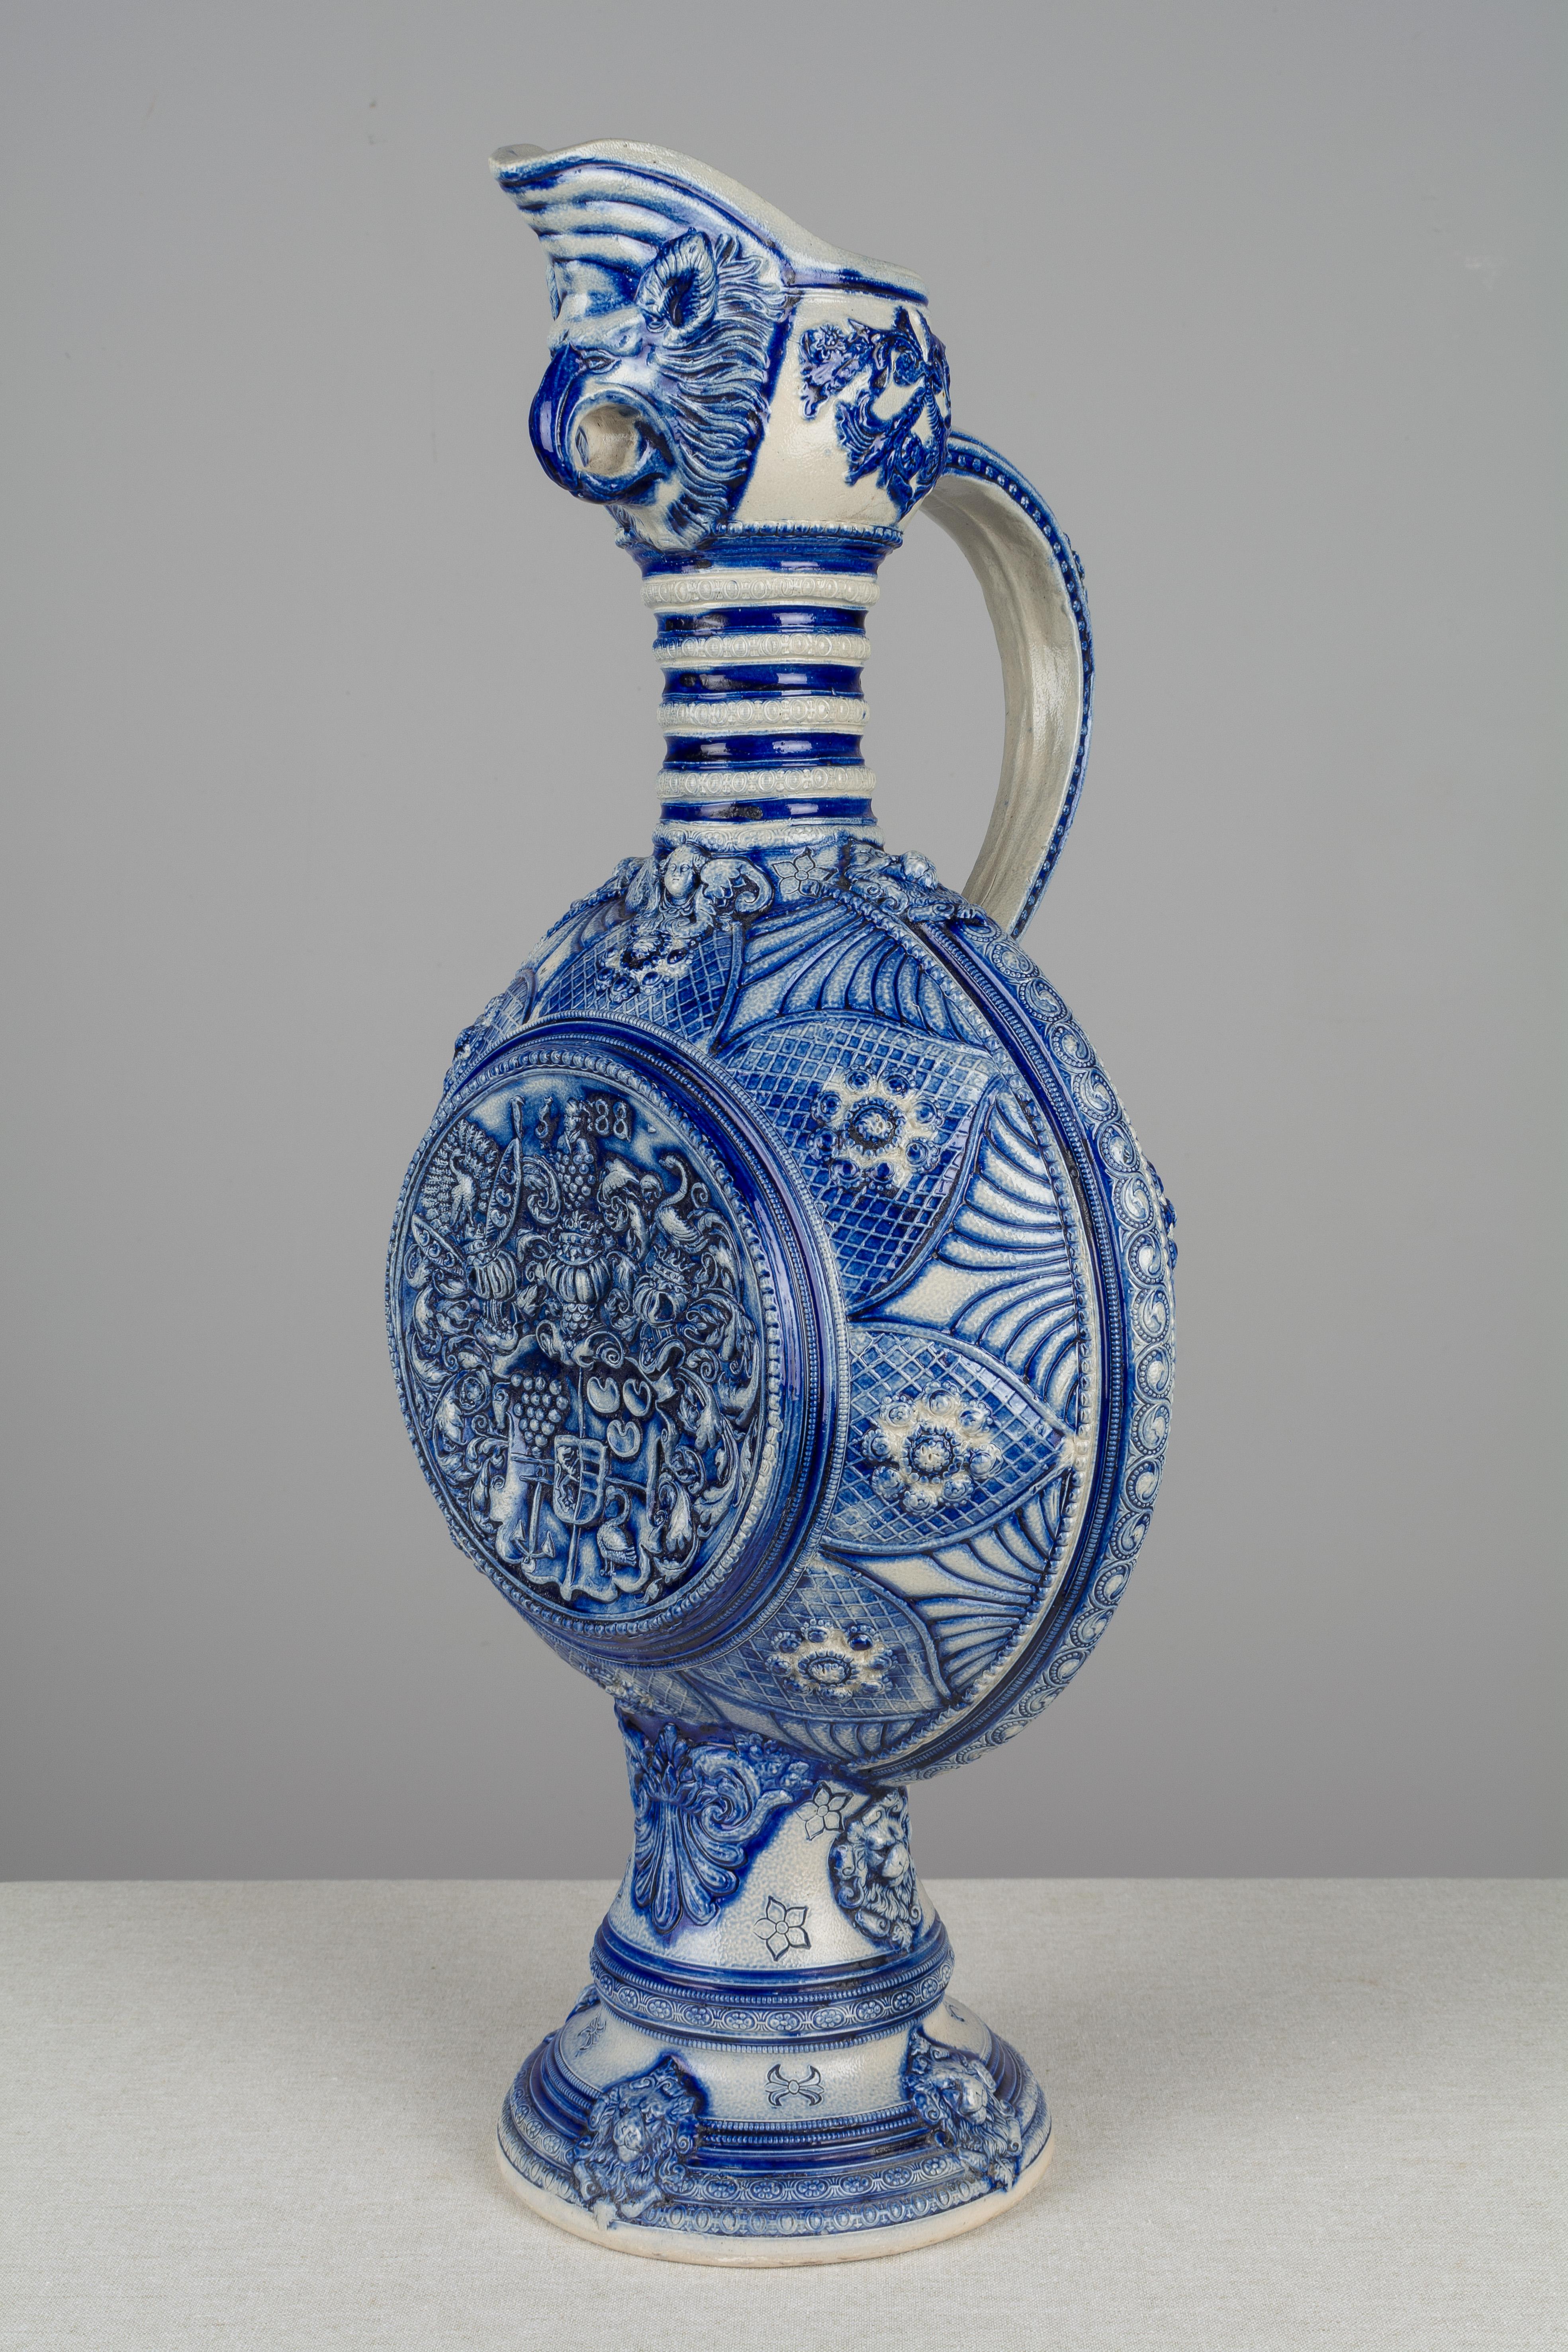 A large German Westerwald pottery ewer with an animal head spout, tall ribbed neck and circular body on a flaring base. Elaborately decorated in deep cobalt blue with heraldic imagery and symbols including a coat of arms, crowns, a peacock and lion